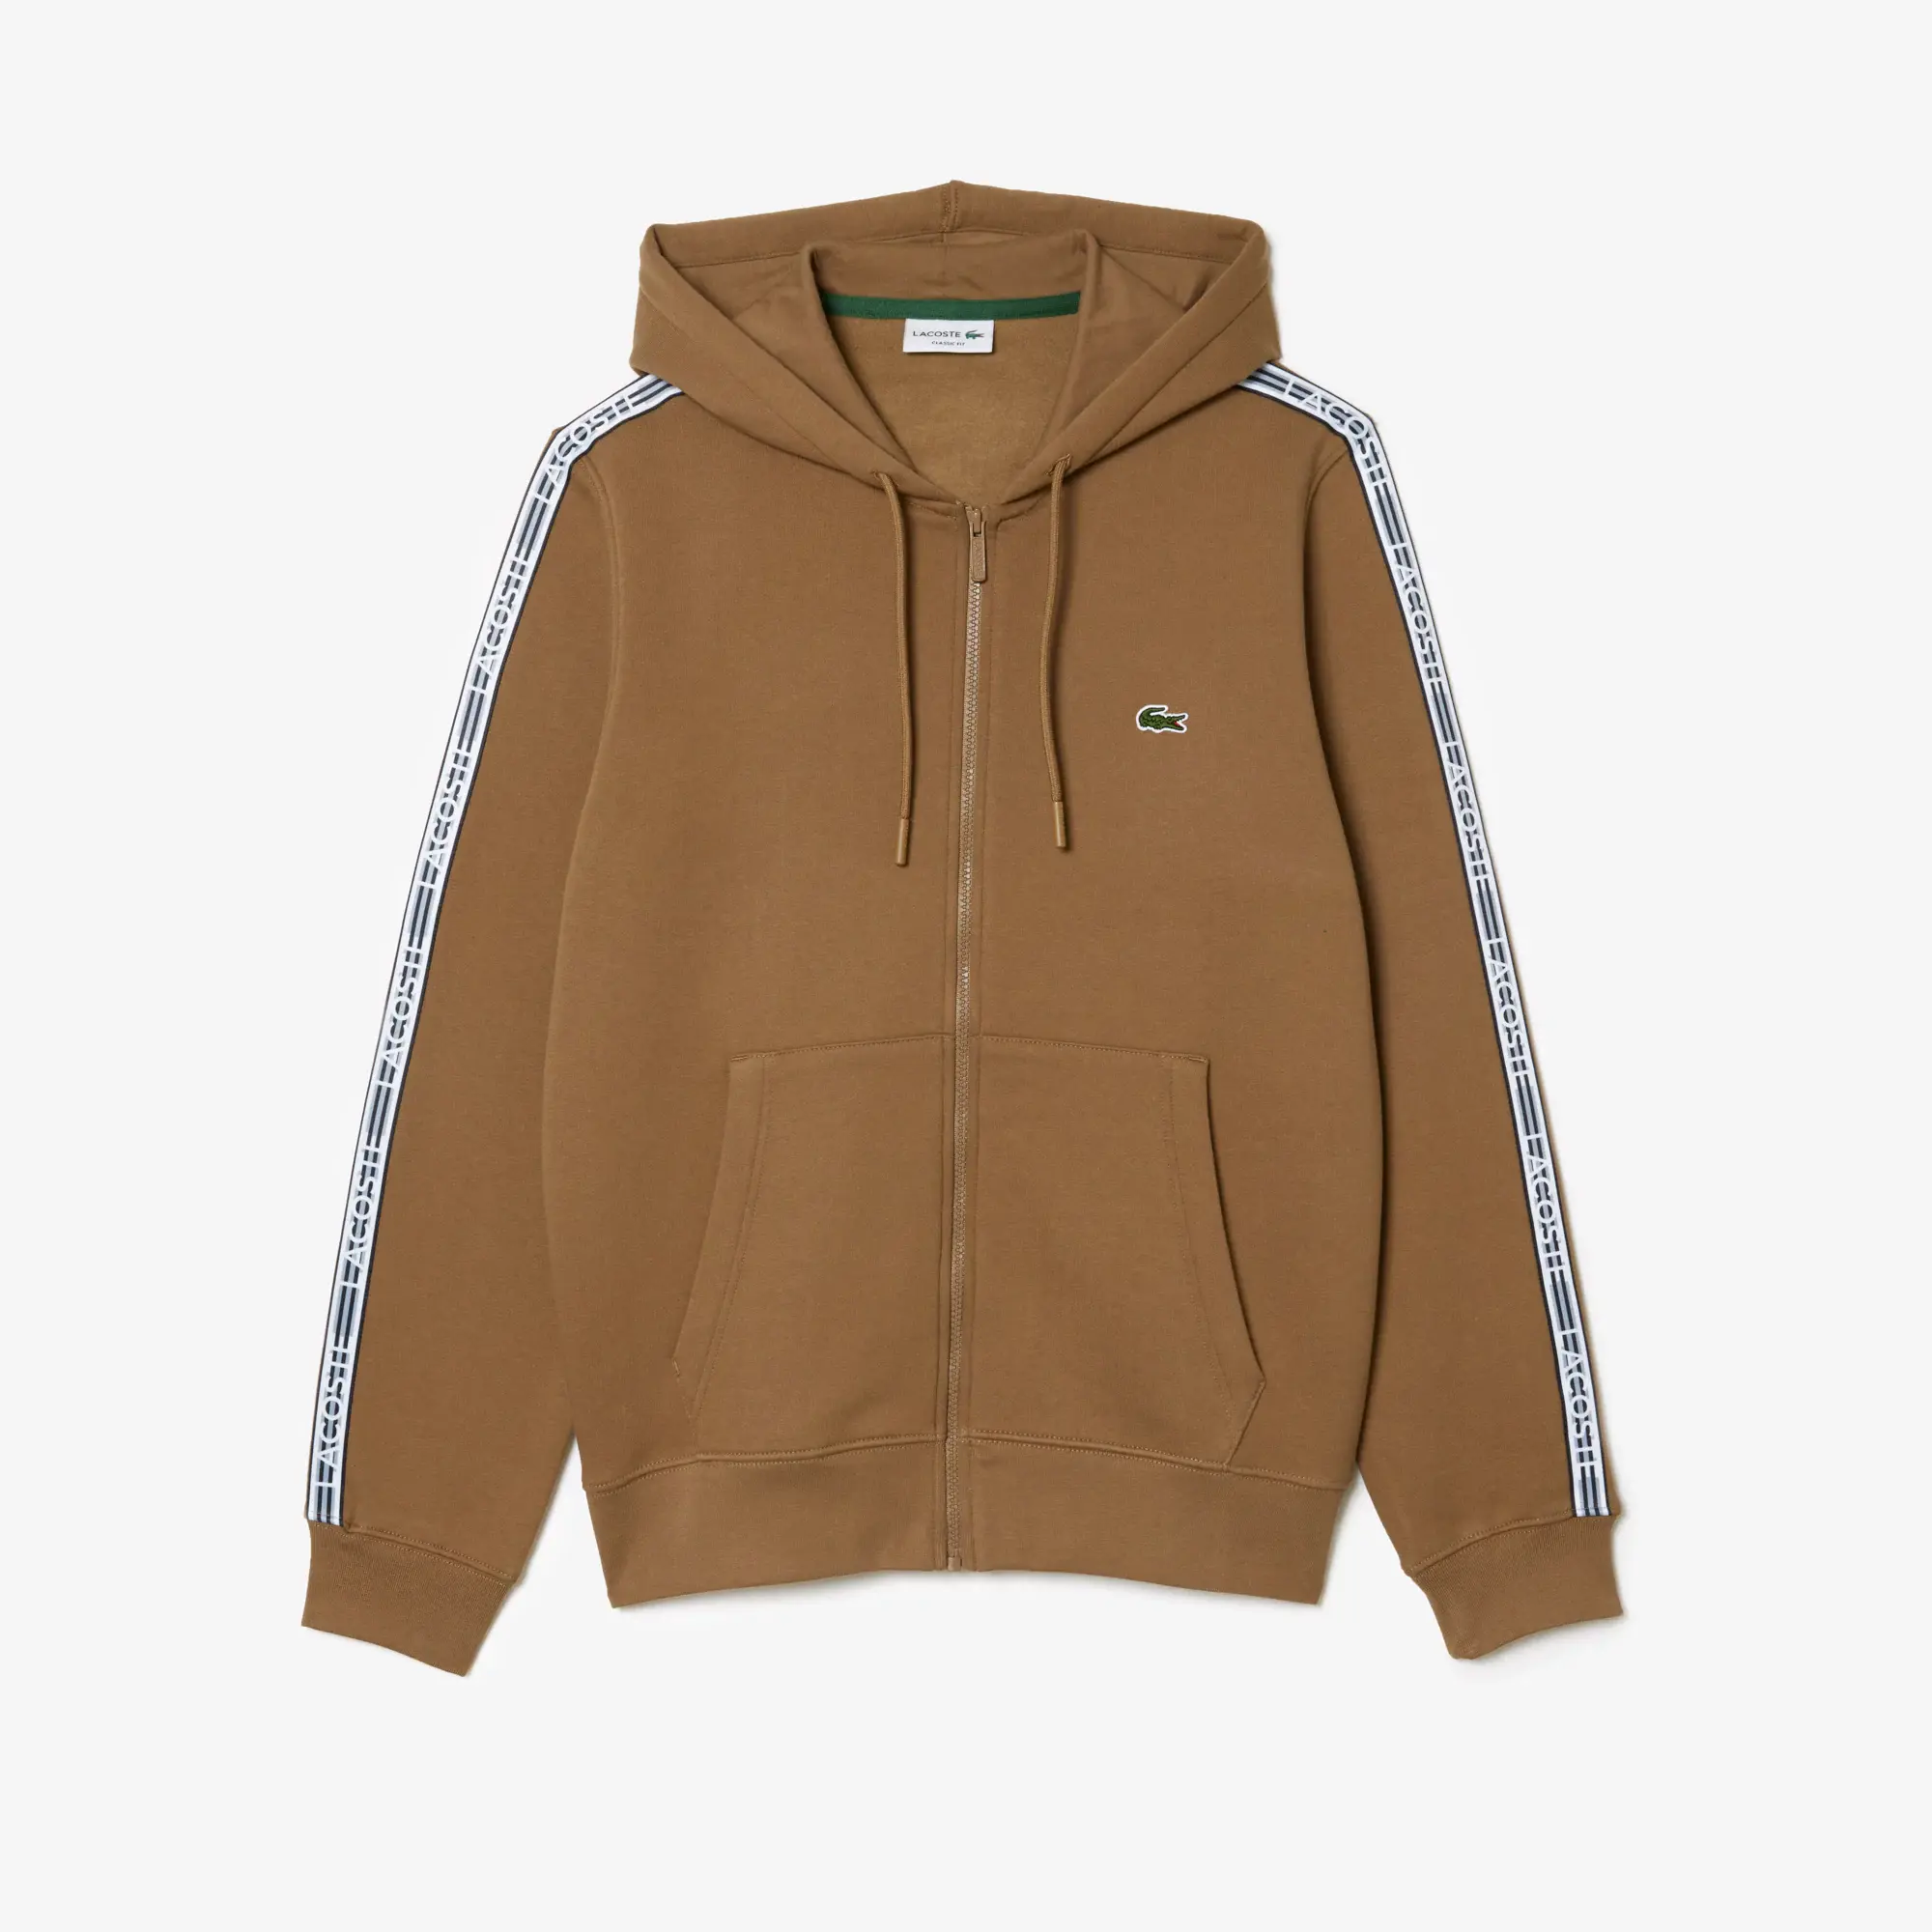 Lacoste Men’s Classic Fit Branded Stripes Zip-Up Hoodie. 1